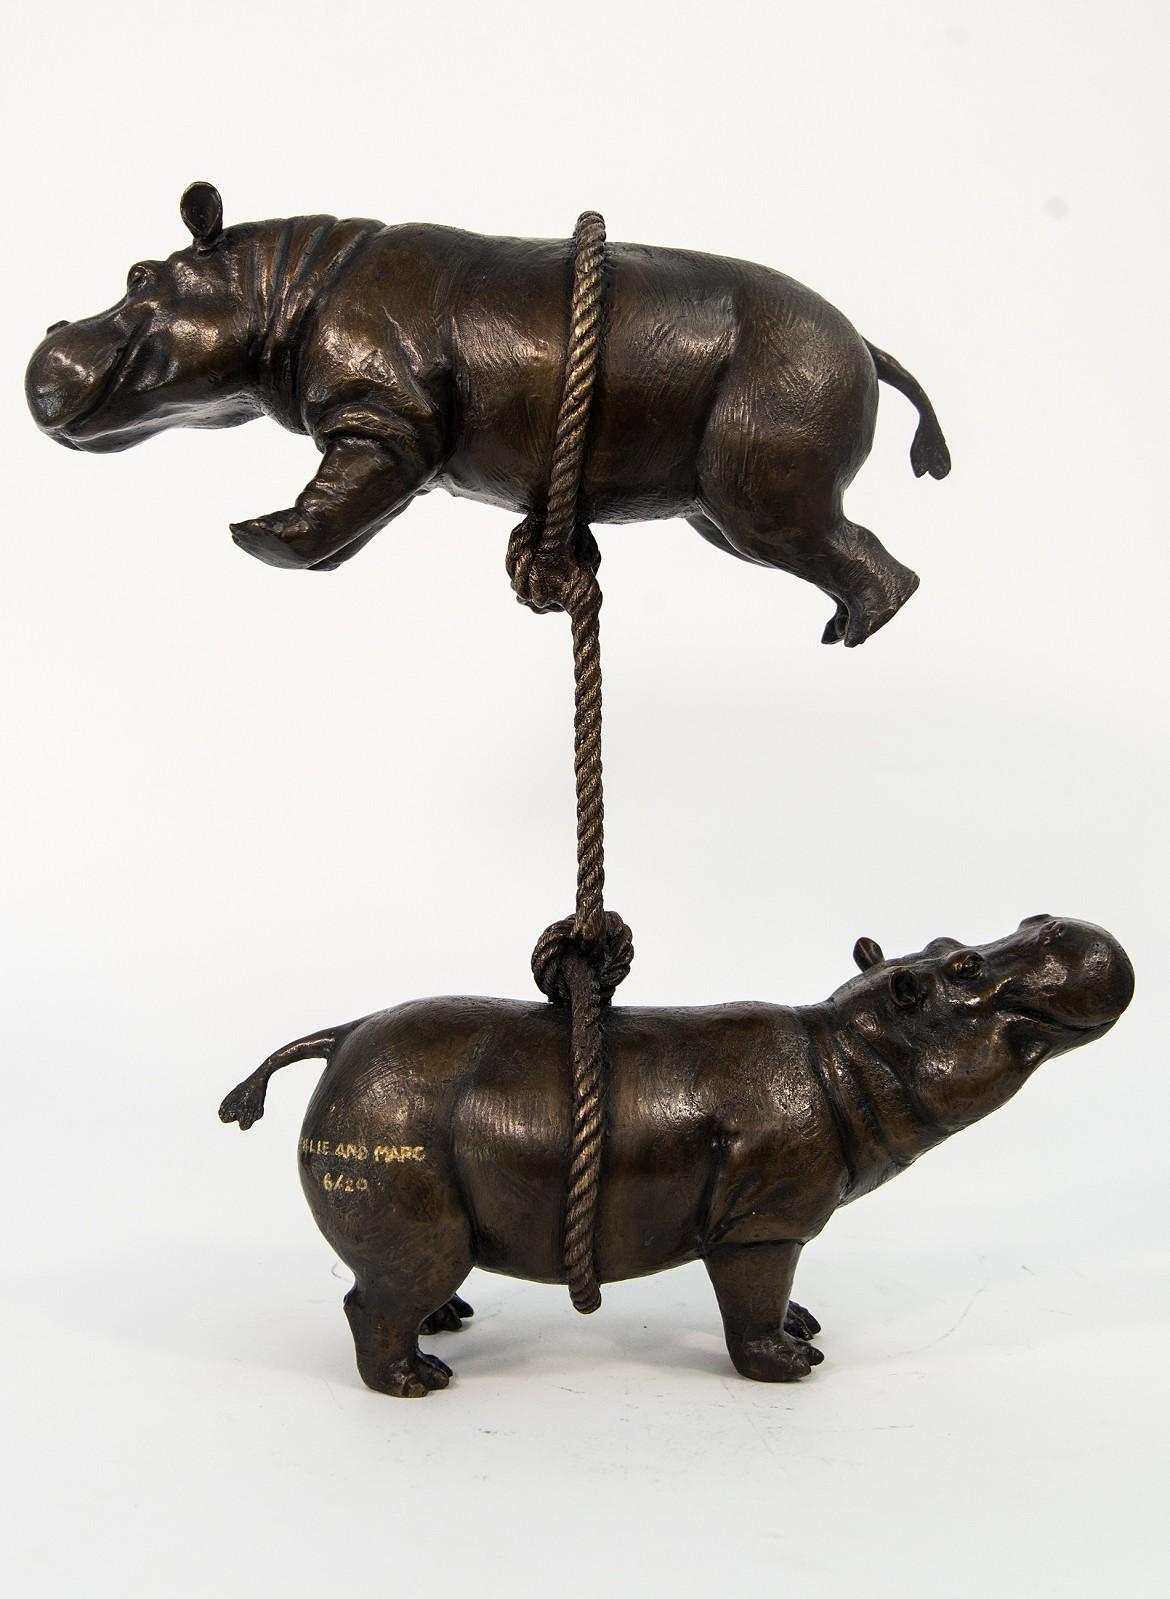 Hippos Support Each Other  - figurative, playful, bronze sculpture - Contemporary Sculpture by Gillie and Marc Schattner